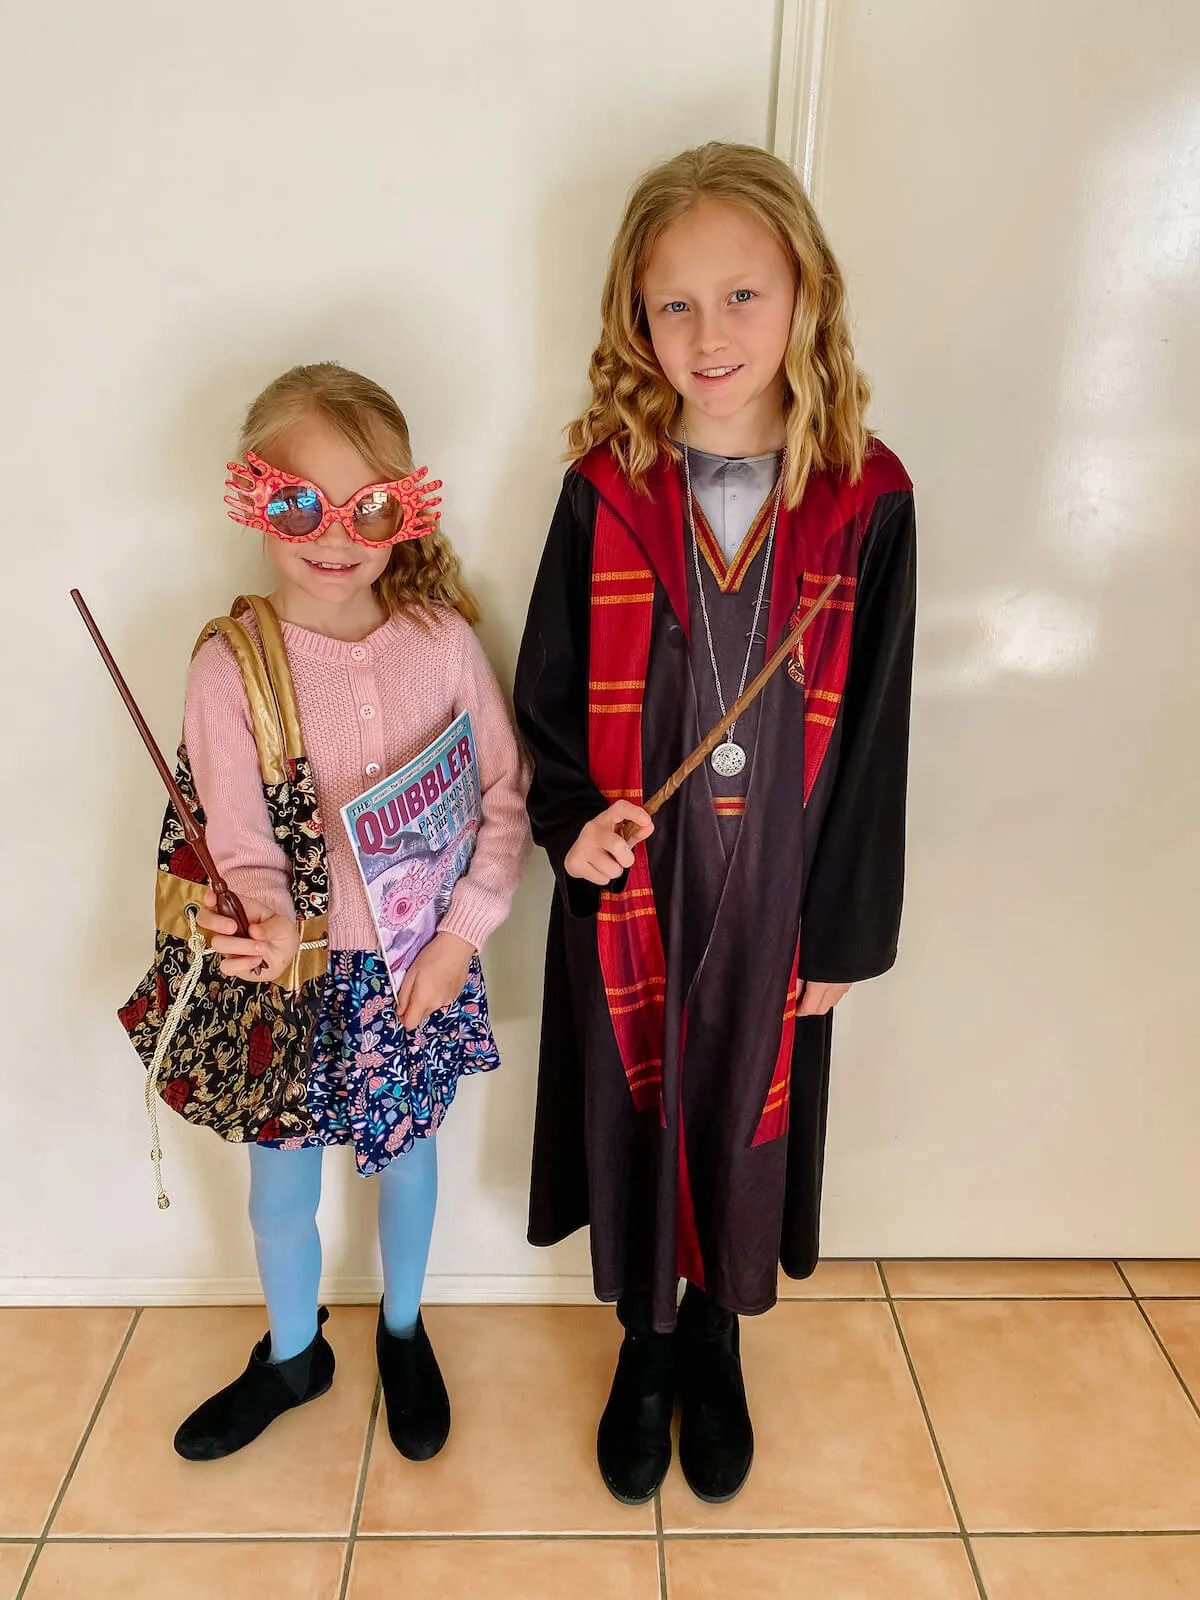 Kids dressed up for harry potter theme